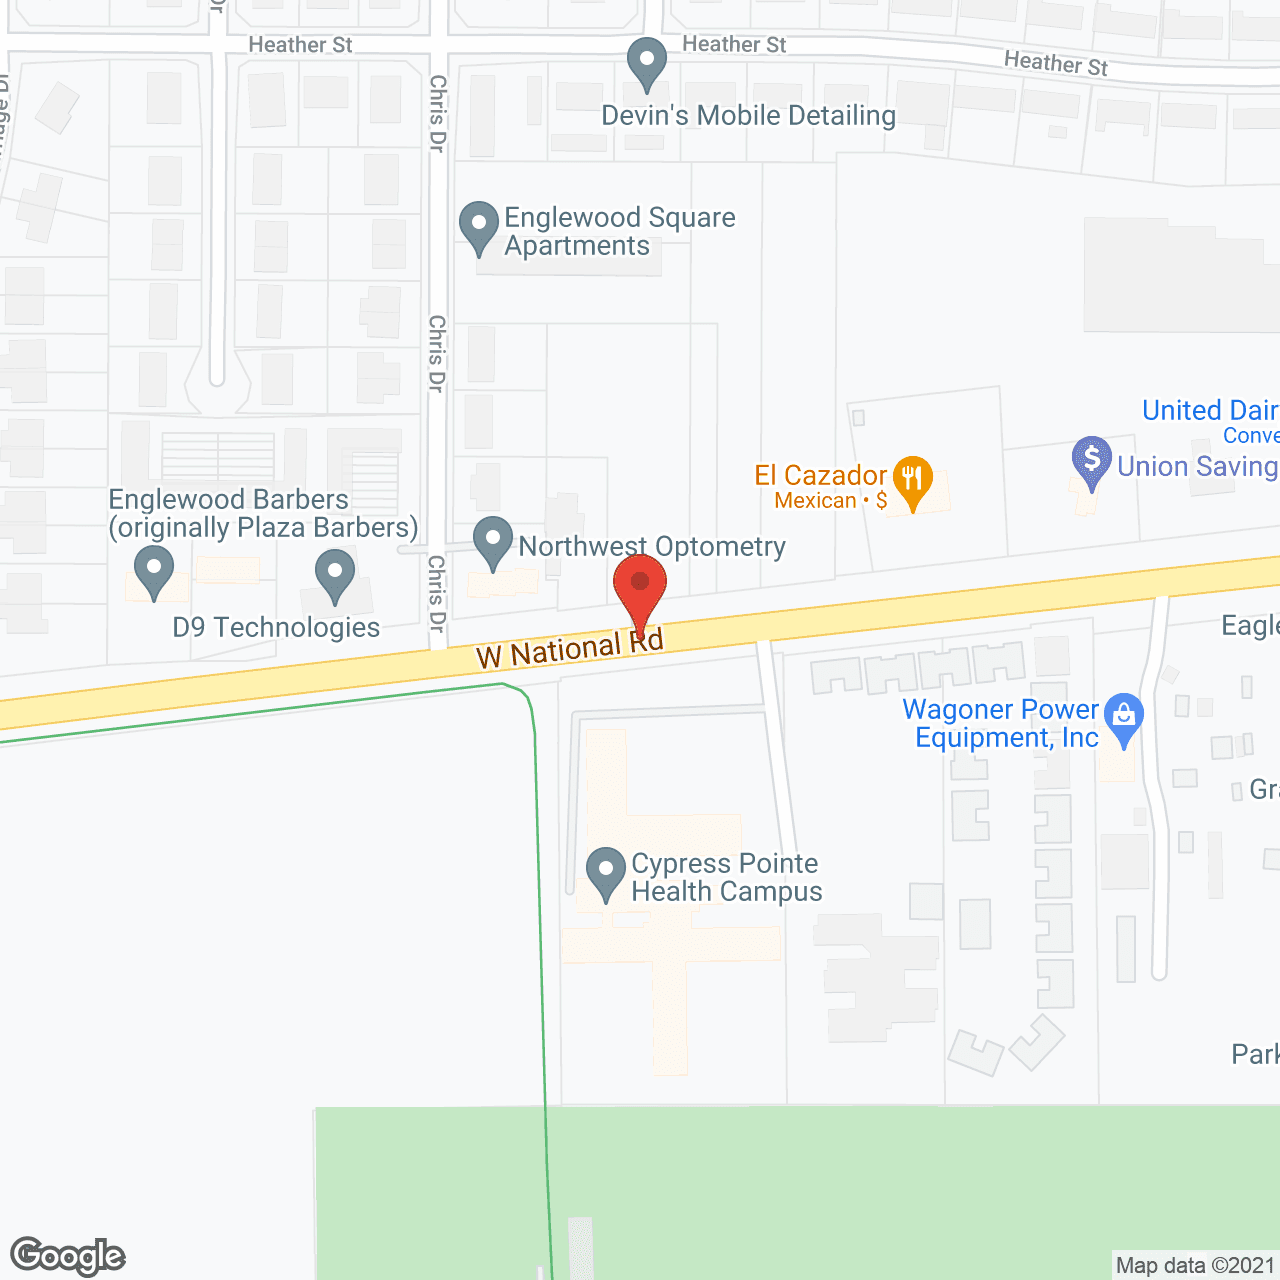 Cypress Pointe Health Campus in google map